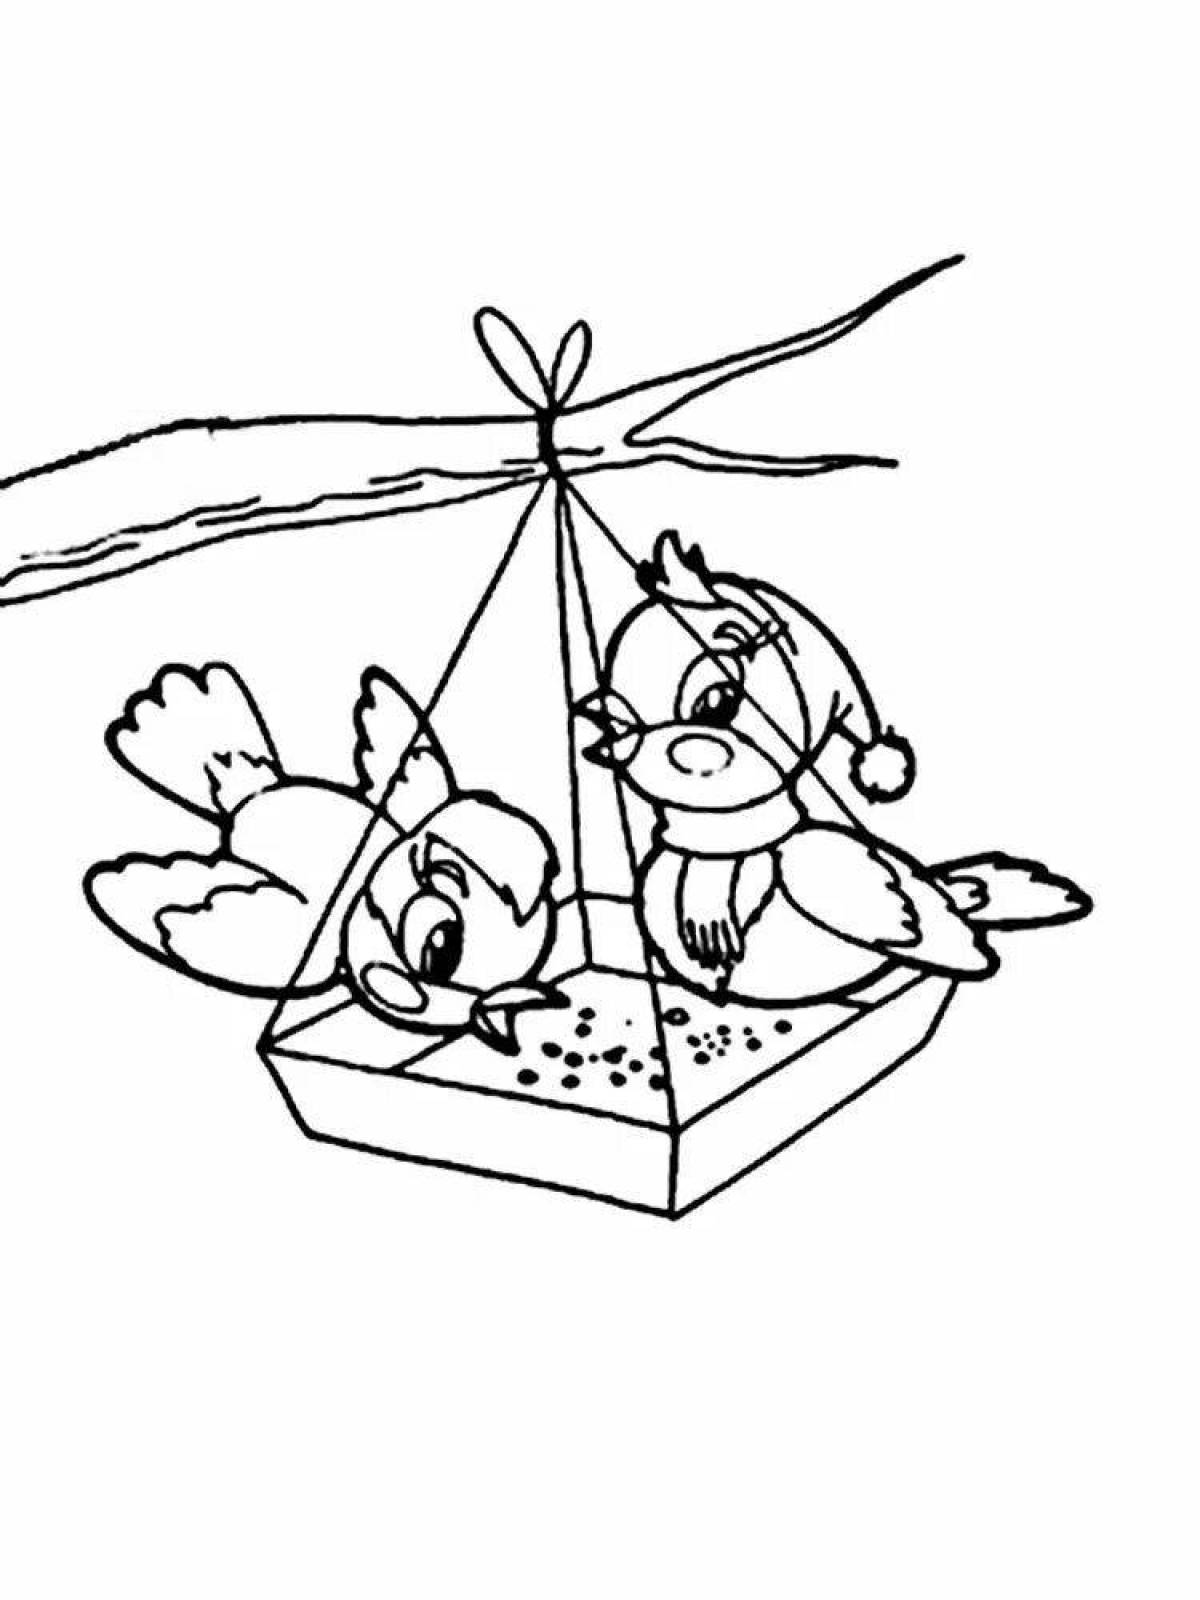 Serene coloring page birds at the feeder in winter